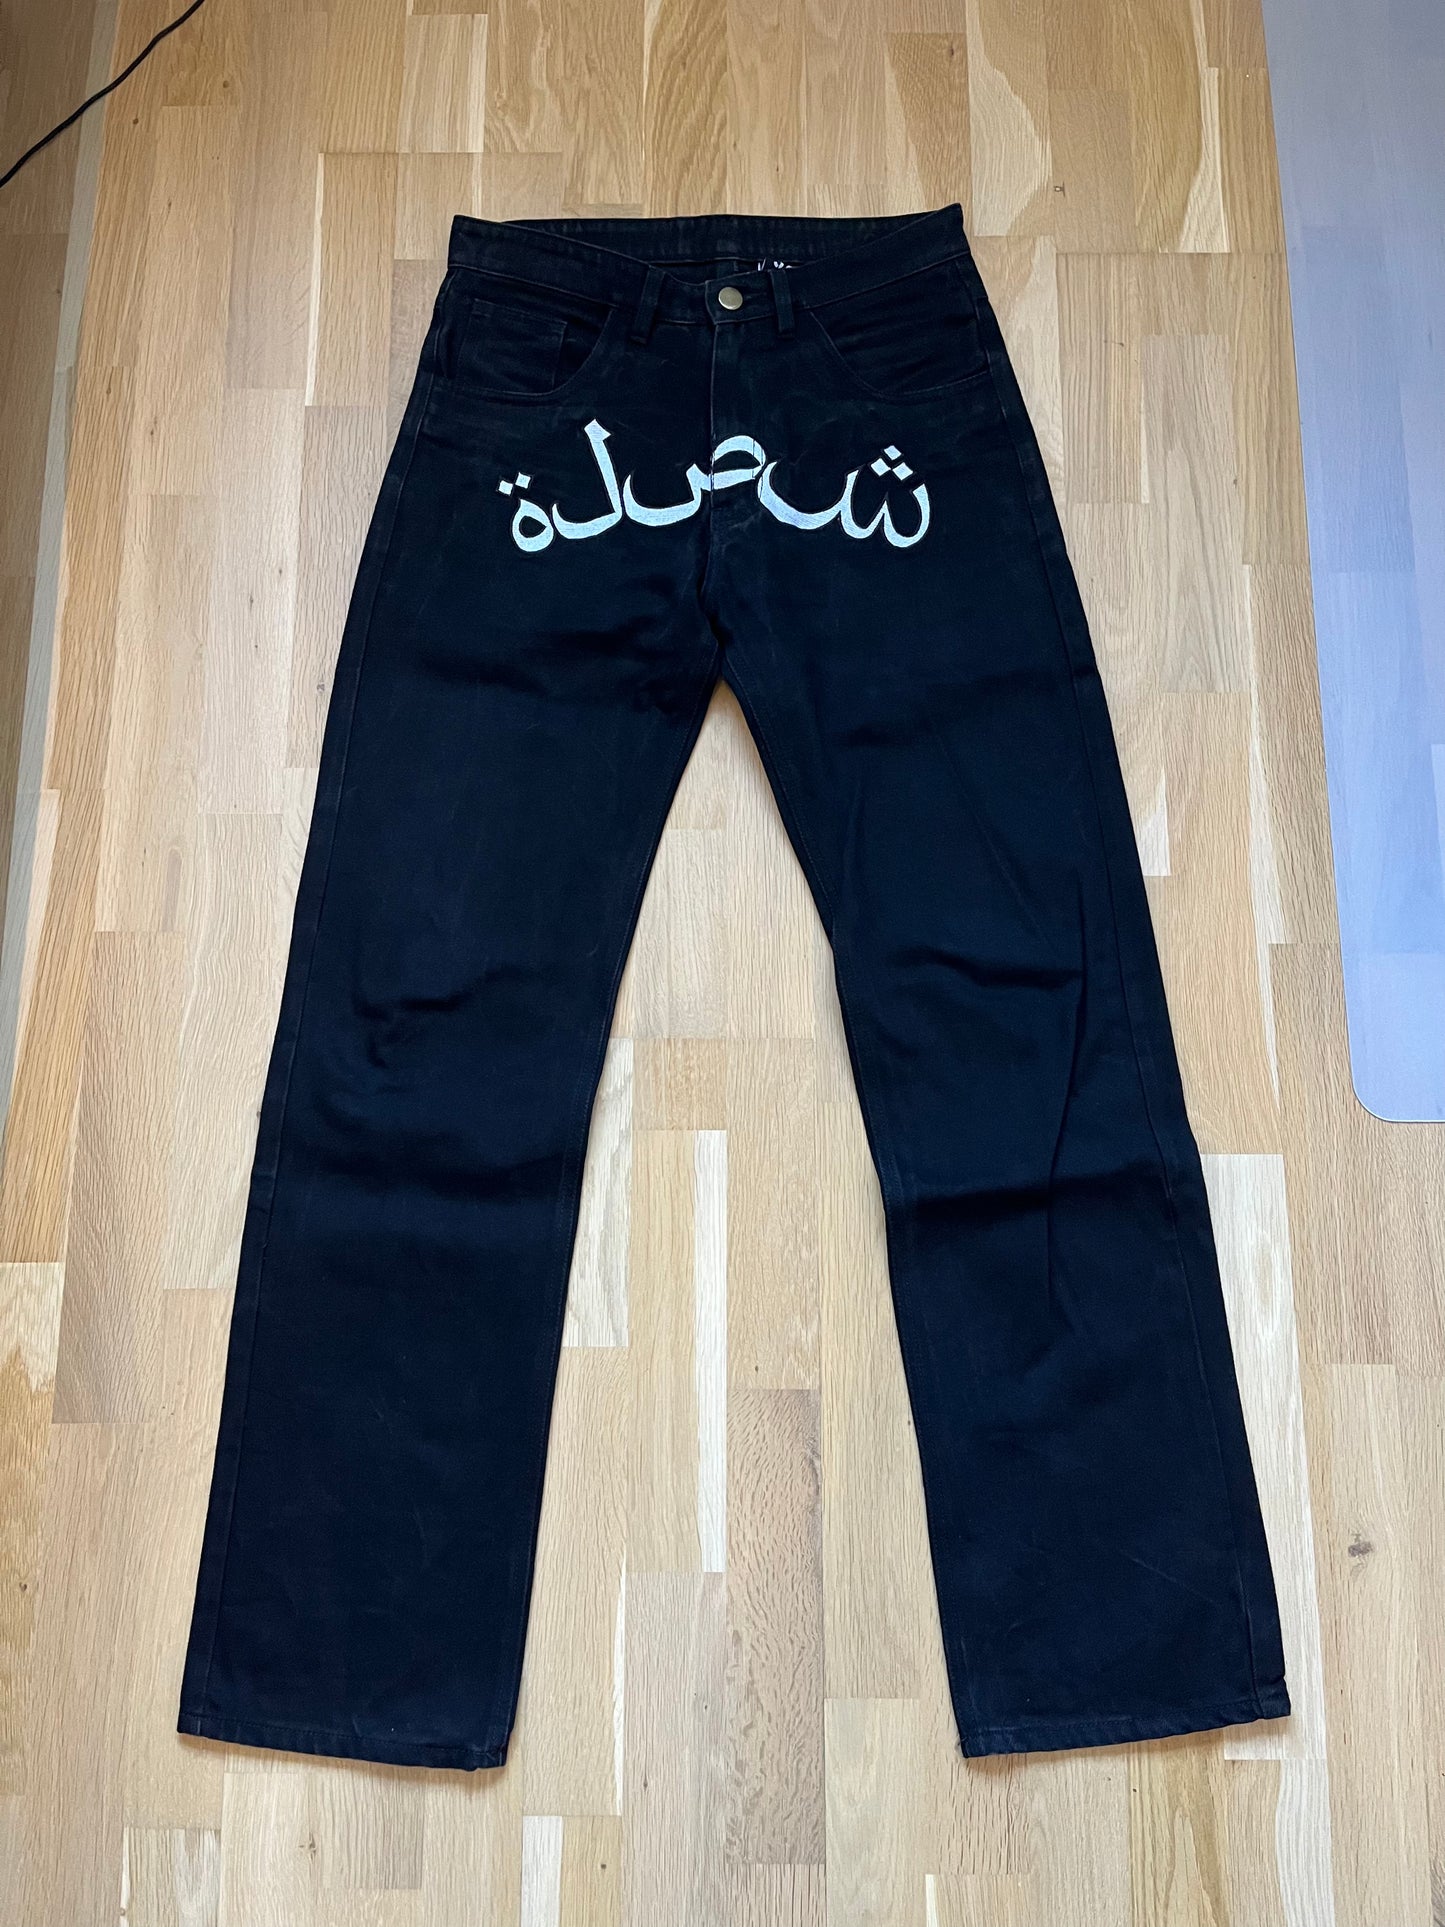 Oasis jeans